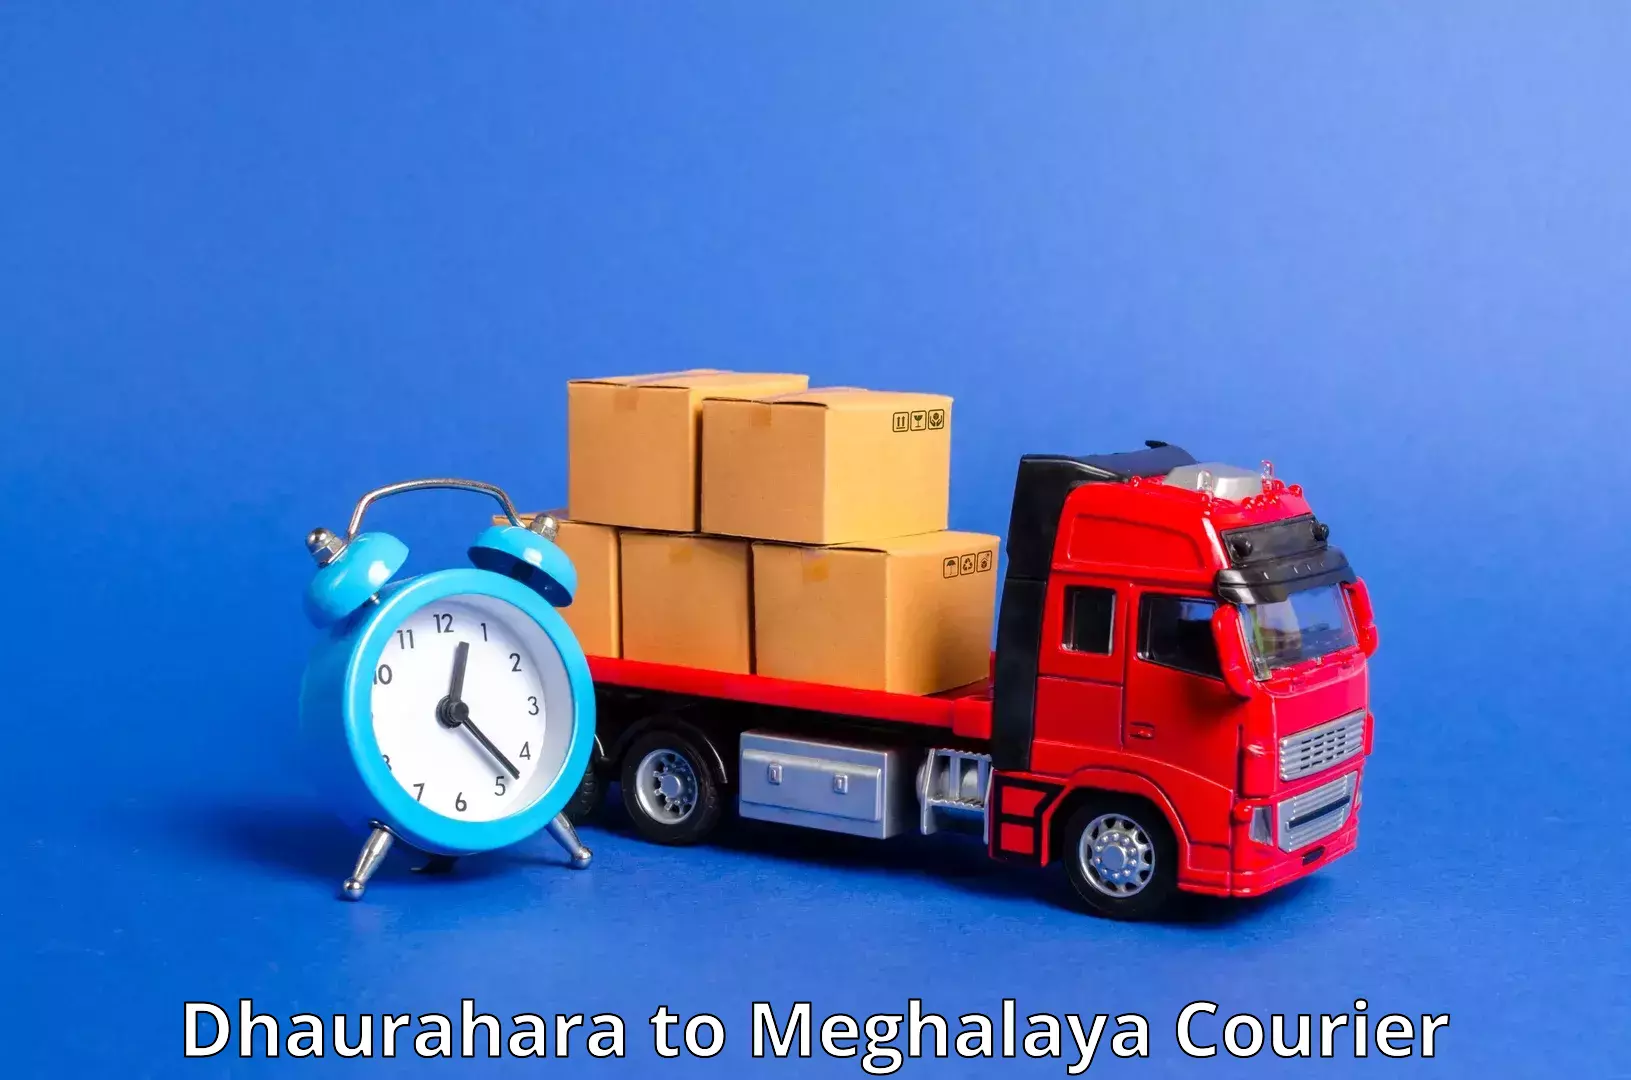 Express delivery network Dhaurahara to Meghalaya